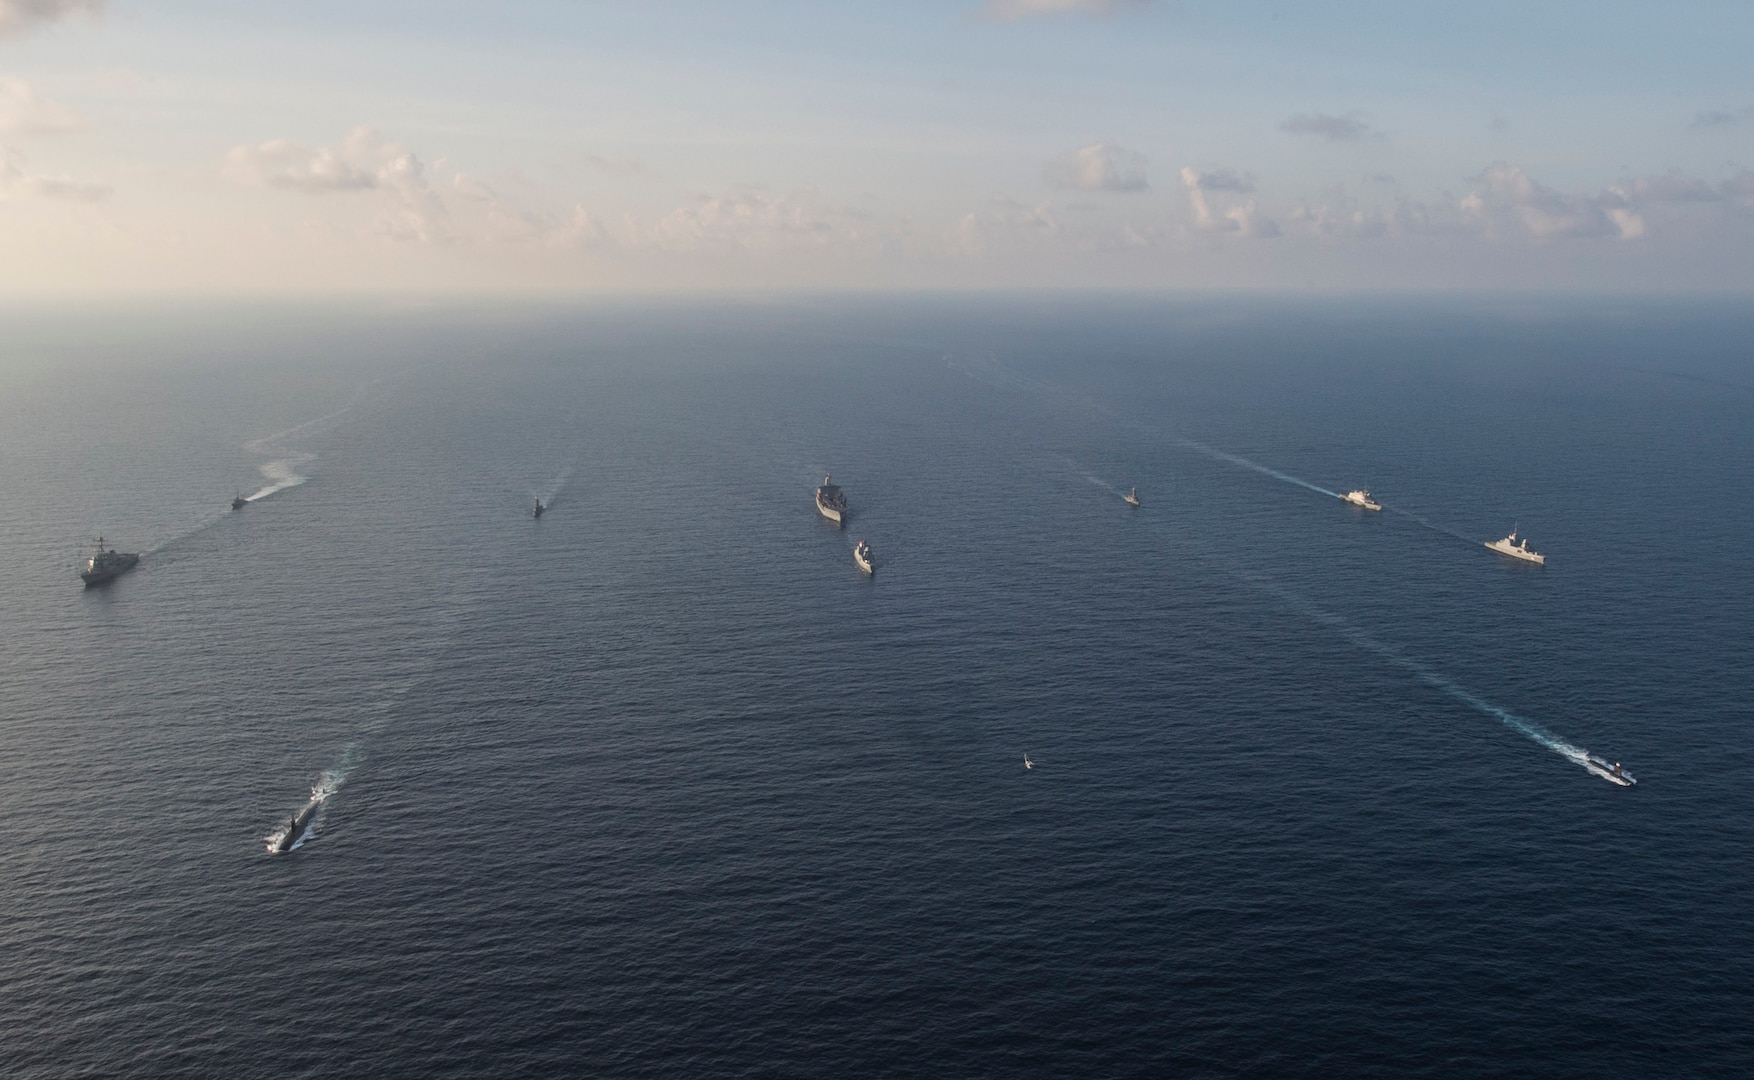 Ships and submarines from the Republic of Singapore navy and U.S. Navy gather in formation during the underway phase of Cooperation Afloat Readiness and Training (CARAT) Singapore 2015. CARAT is an annual, bilateral exercise series with the U.S. Navy, U.S. Marine Corps and the armed forces of nine partner nations. (U.S. Navy photo by Mass Communication Specialist 2nd Class Joe Bishop/Released)